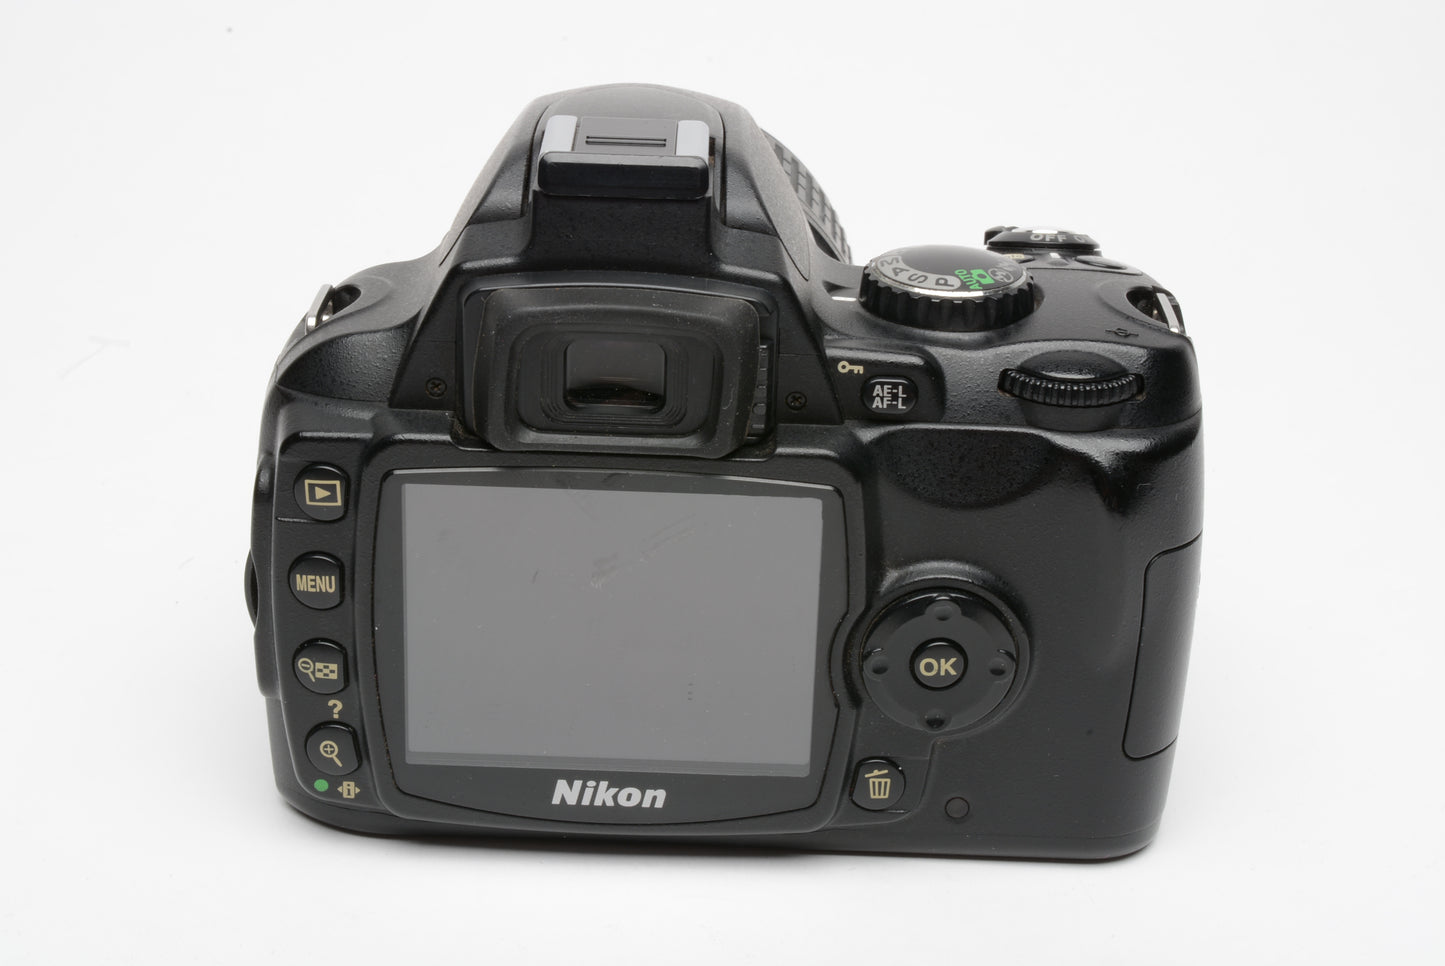 Nikon D40X body w/Nikkor 18-55mm f3.5-5.6 G VR II, 2batts, charger, Only 7833 acts!